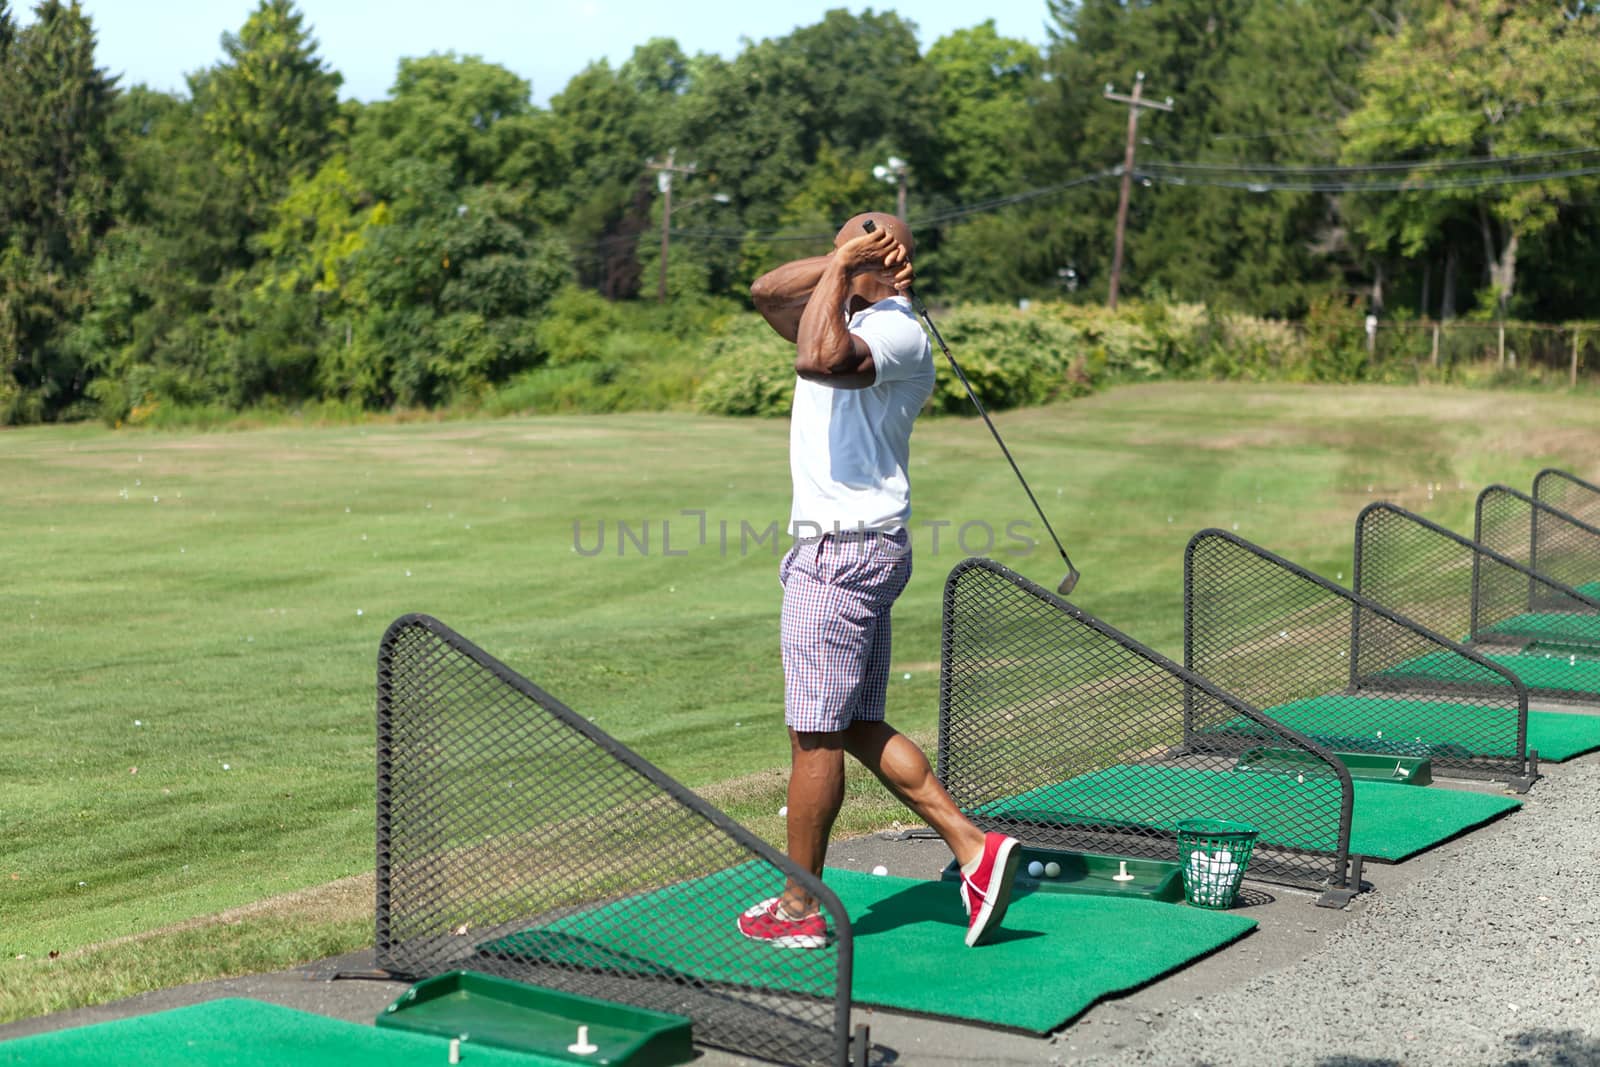 Driving Range Swing Practice by graficallyminded